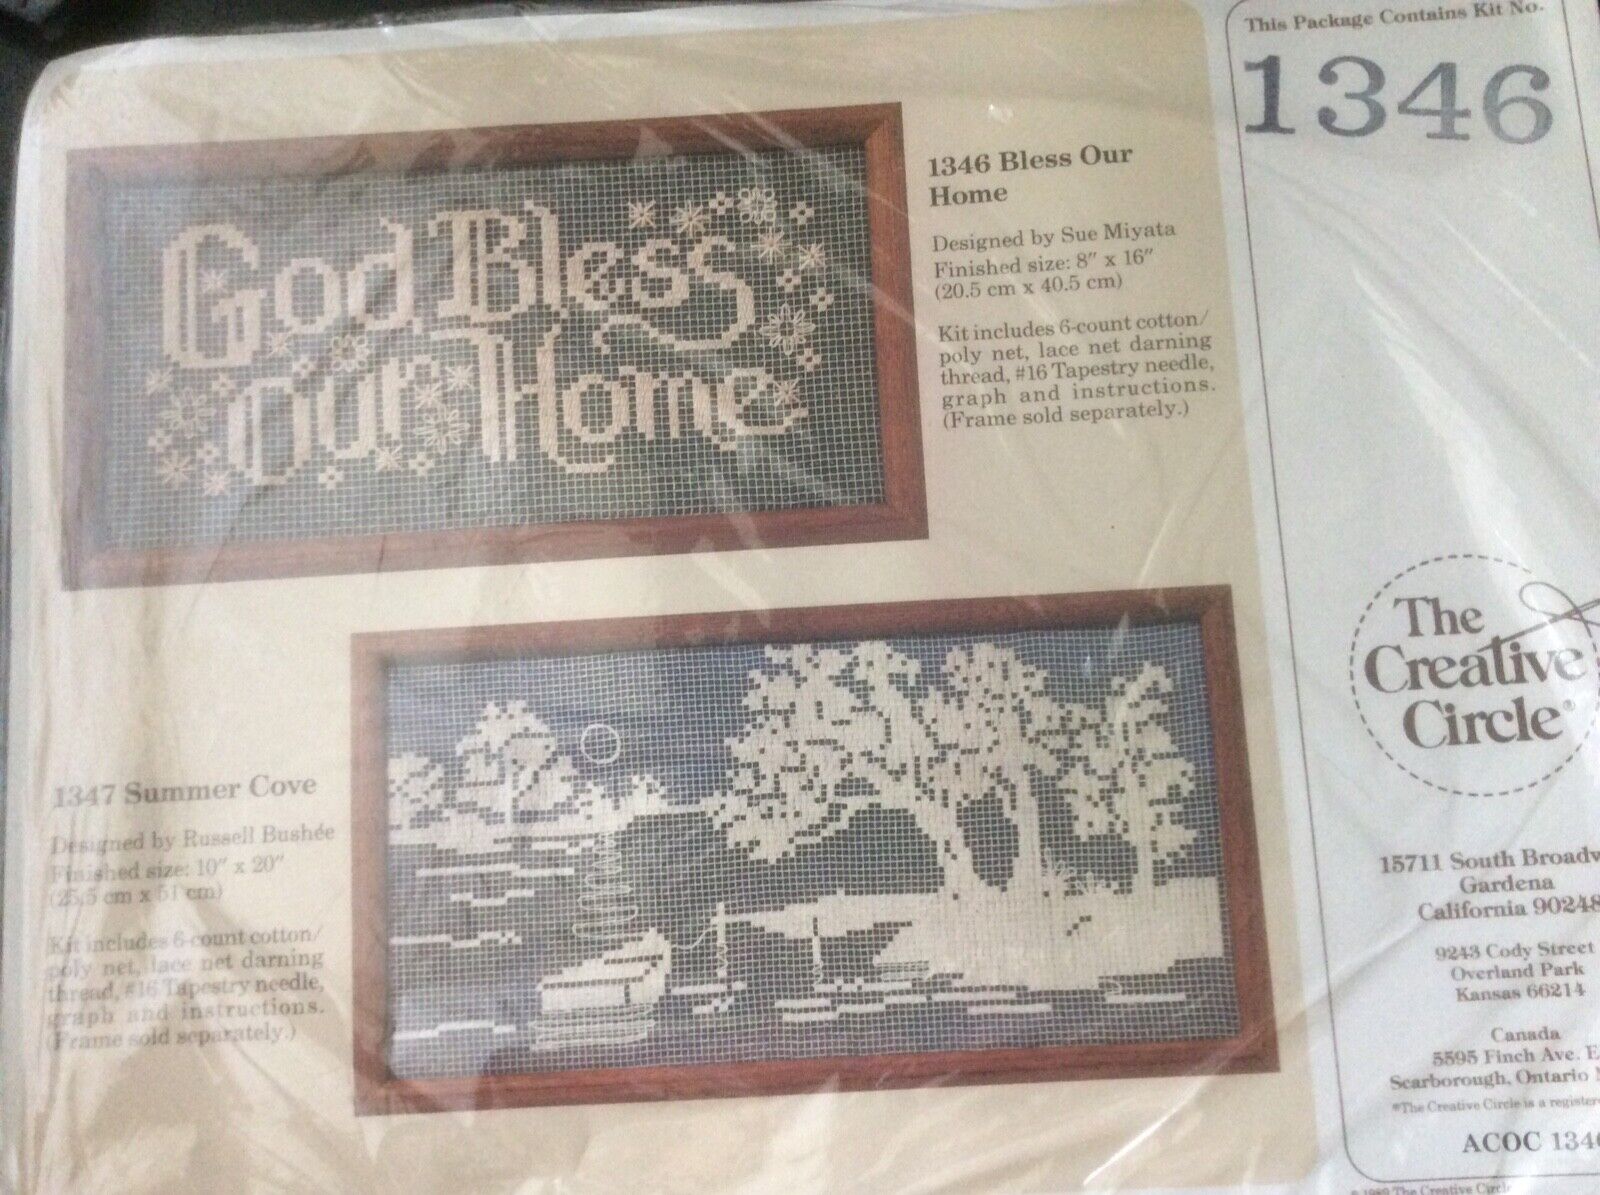 The Creative Circle Kit #1346 Bless Our Home New 1989 8x16” Tapestry Kit